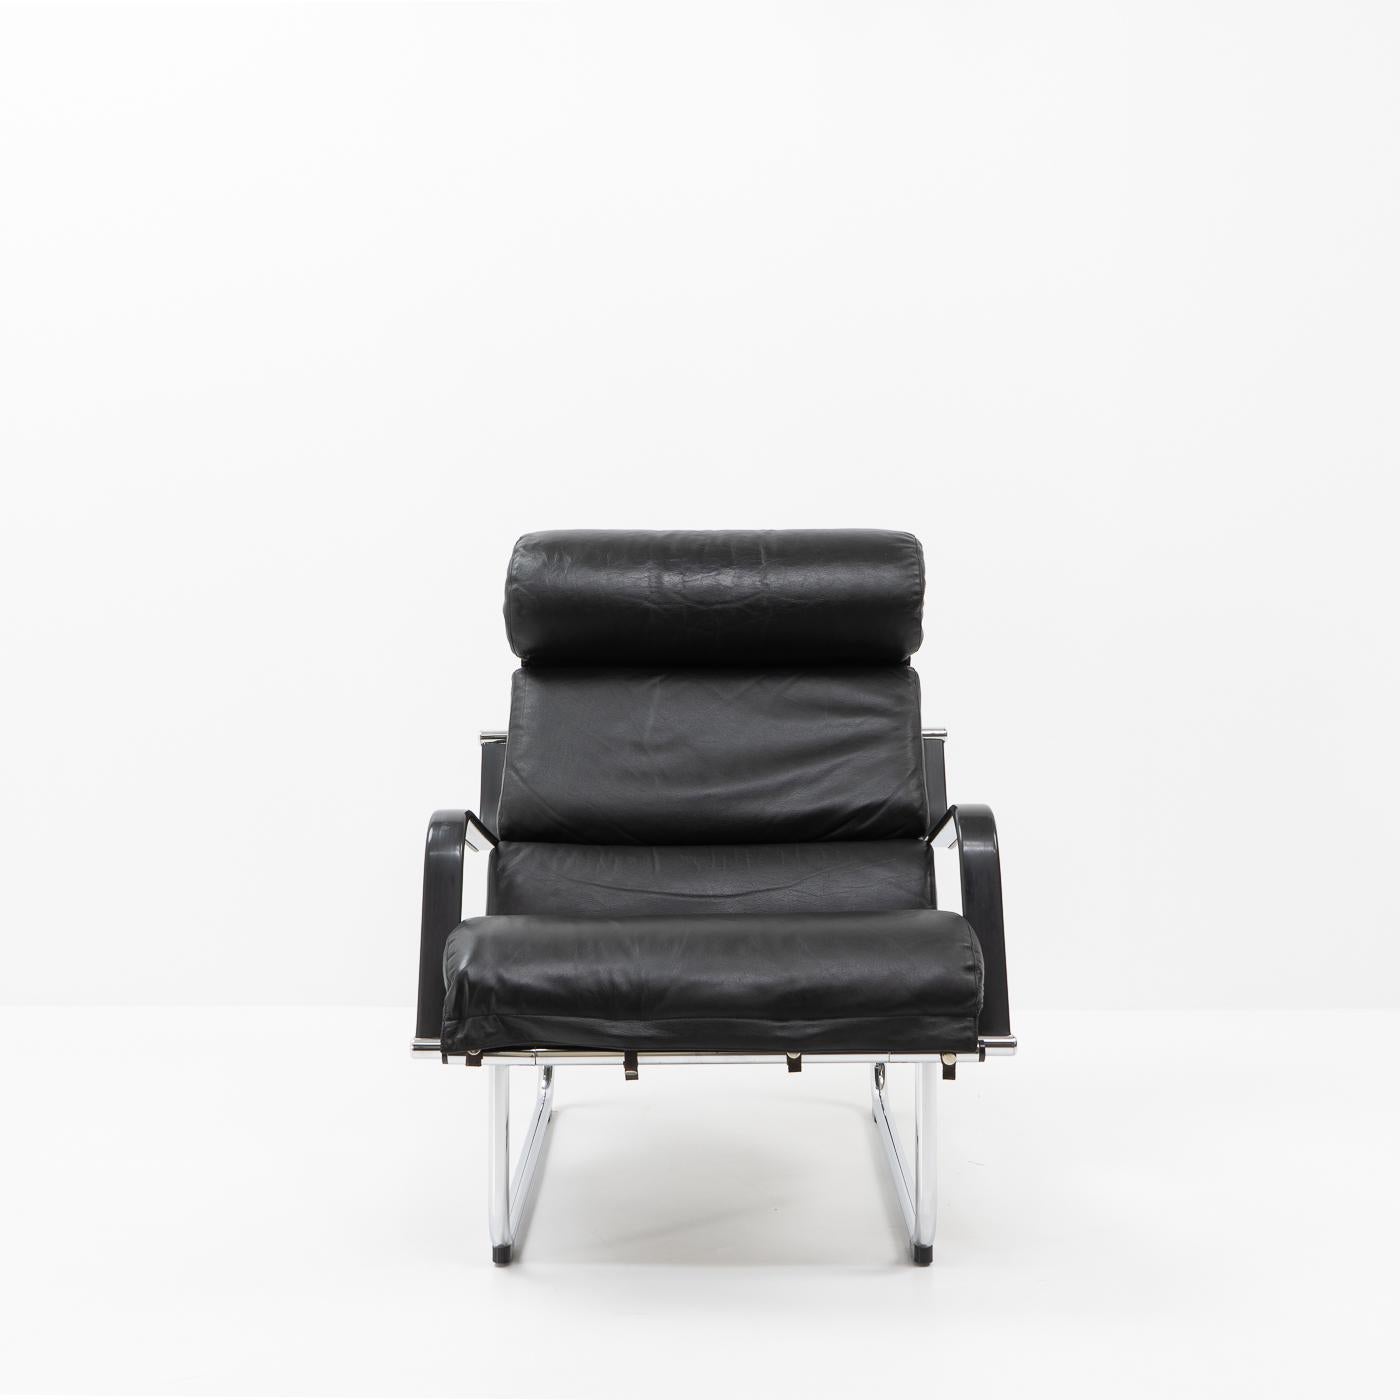 Remmi Lounge chair by Yrjö Kukkapuro, designed during the late 1960s:

Yrjö Kukkapuro is a Finnish furniture designer and architect known for his innovative and functional designs. He has played a significant role in shaping Finland's modernist